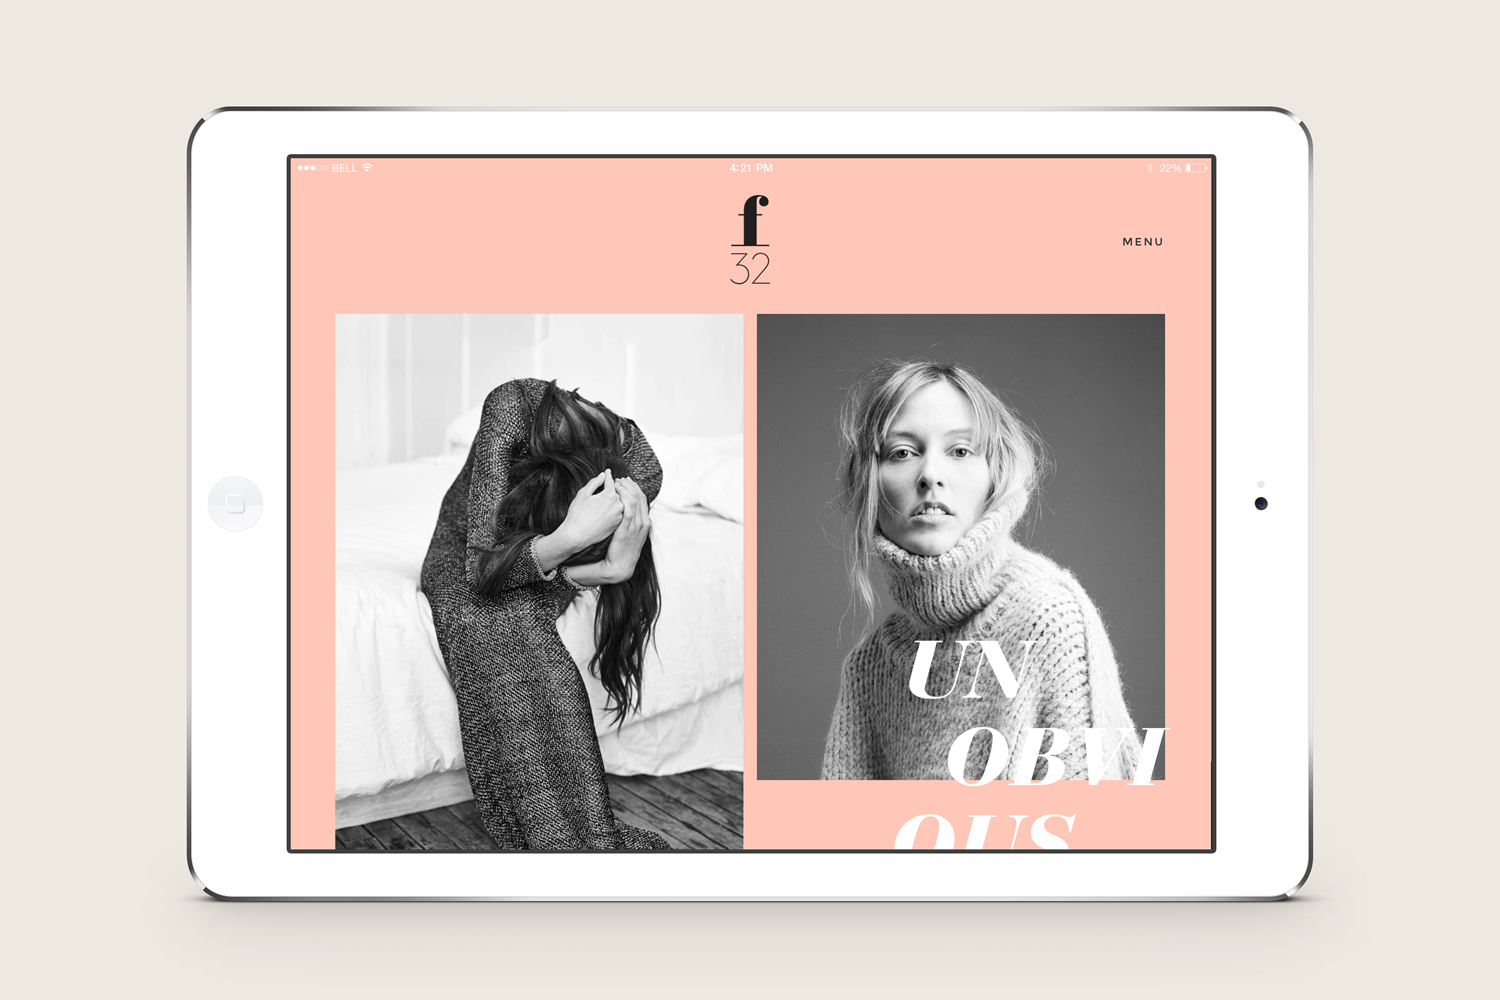 Brand identity and website by Blok for LA based trend-watching company f32